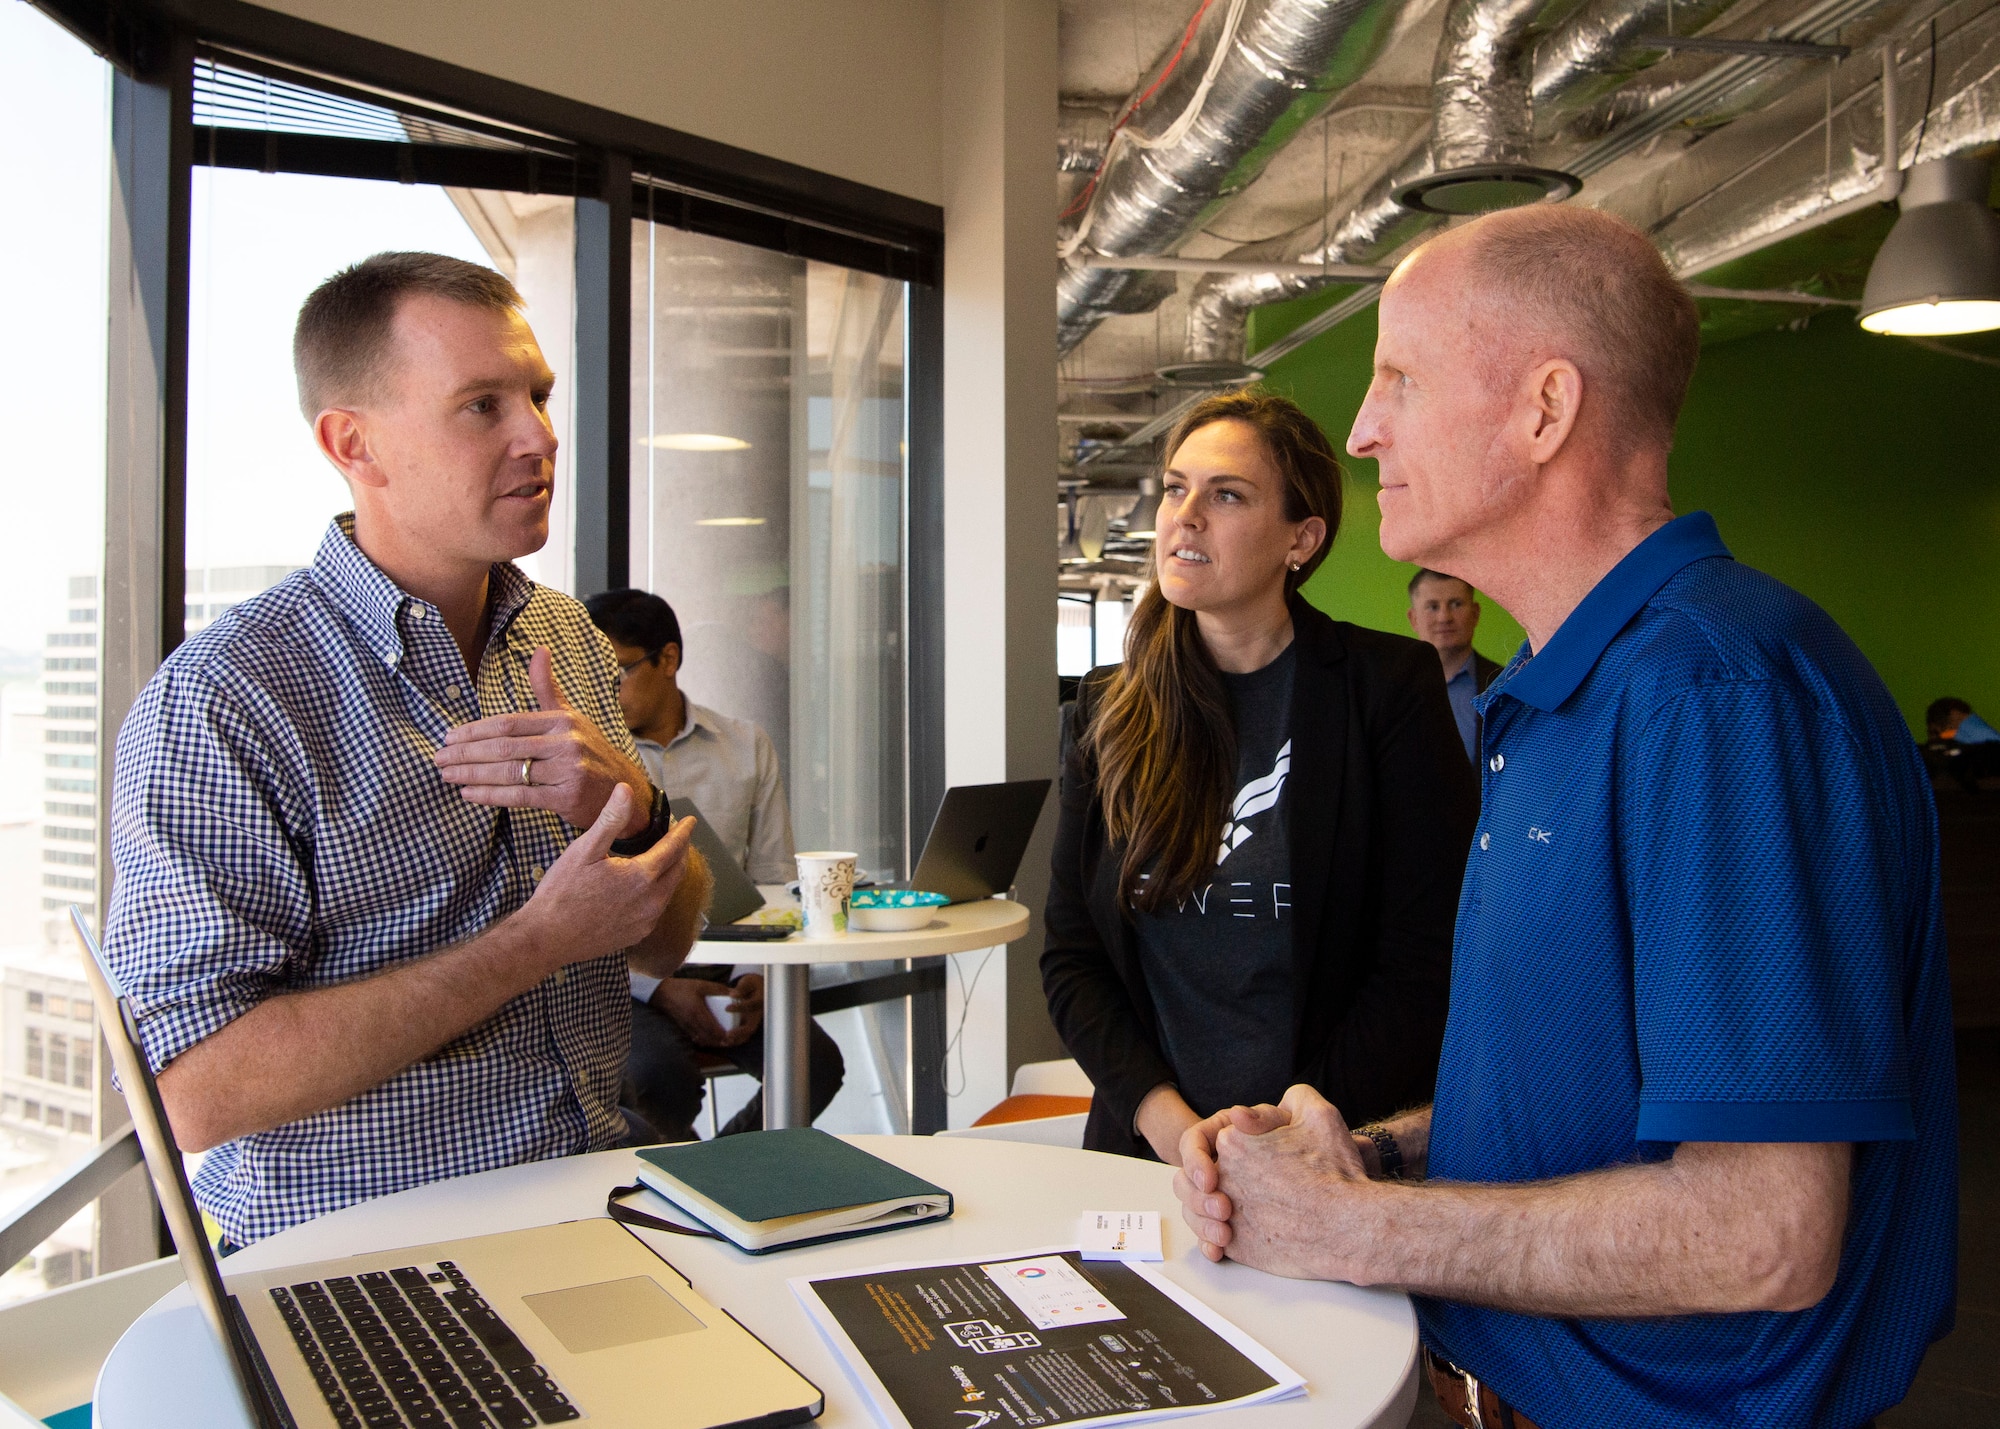 Air Force Vice Chief of Staff Gen. Stephen W. Wilson talks with Patrick Hitchens, Founder and CEO of FitRankings at Capital Factory in Austin, Texas April 9, 2019.